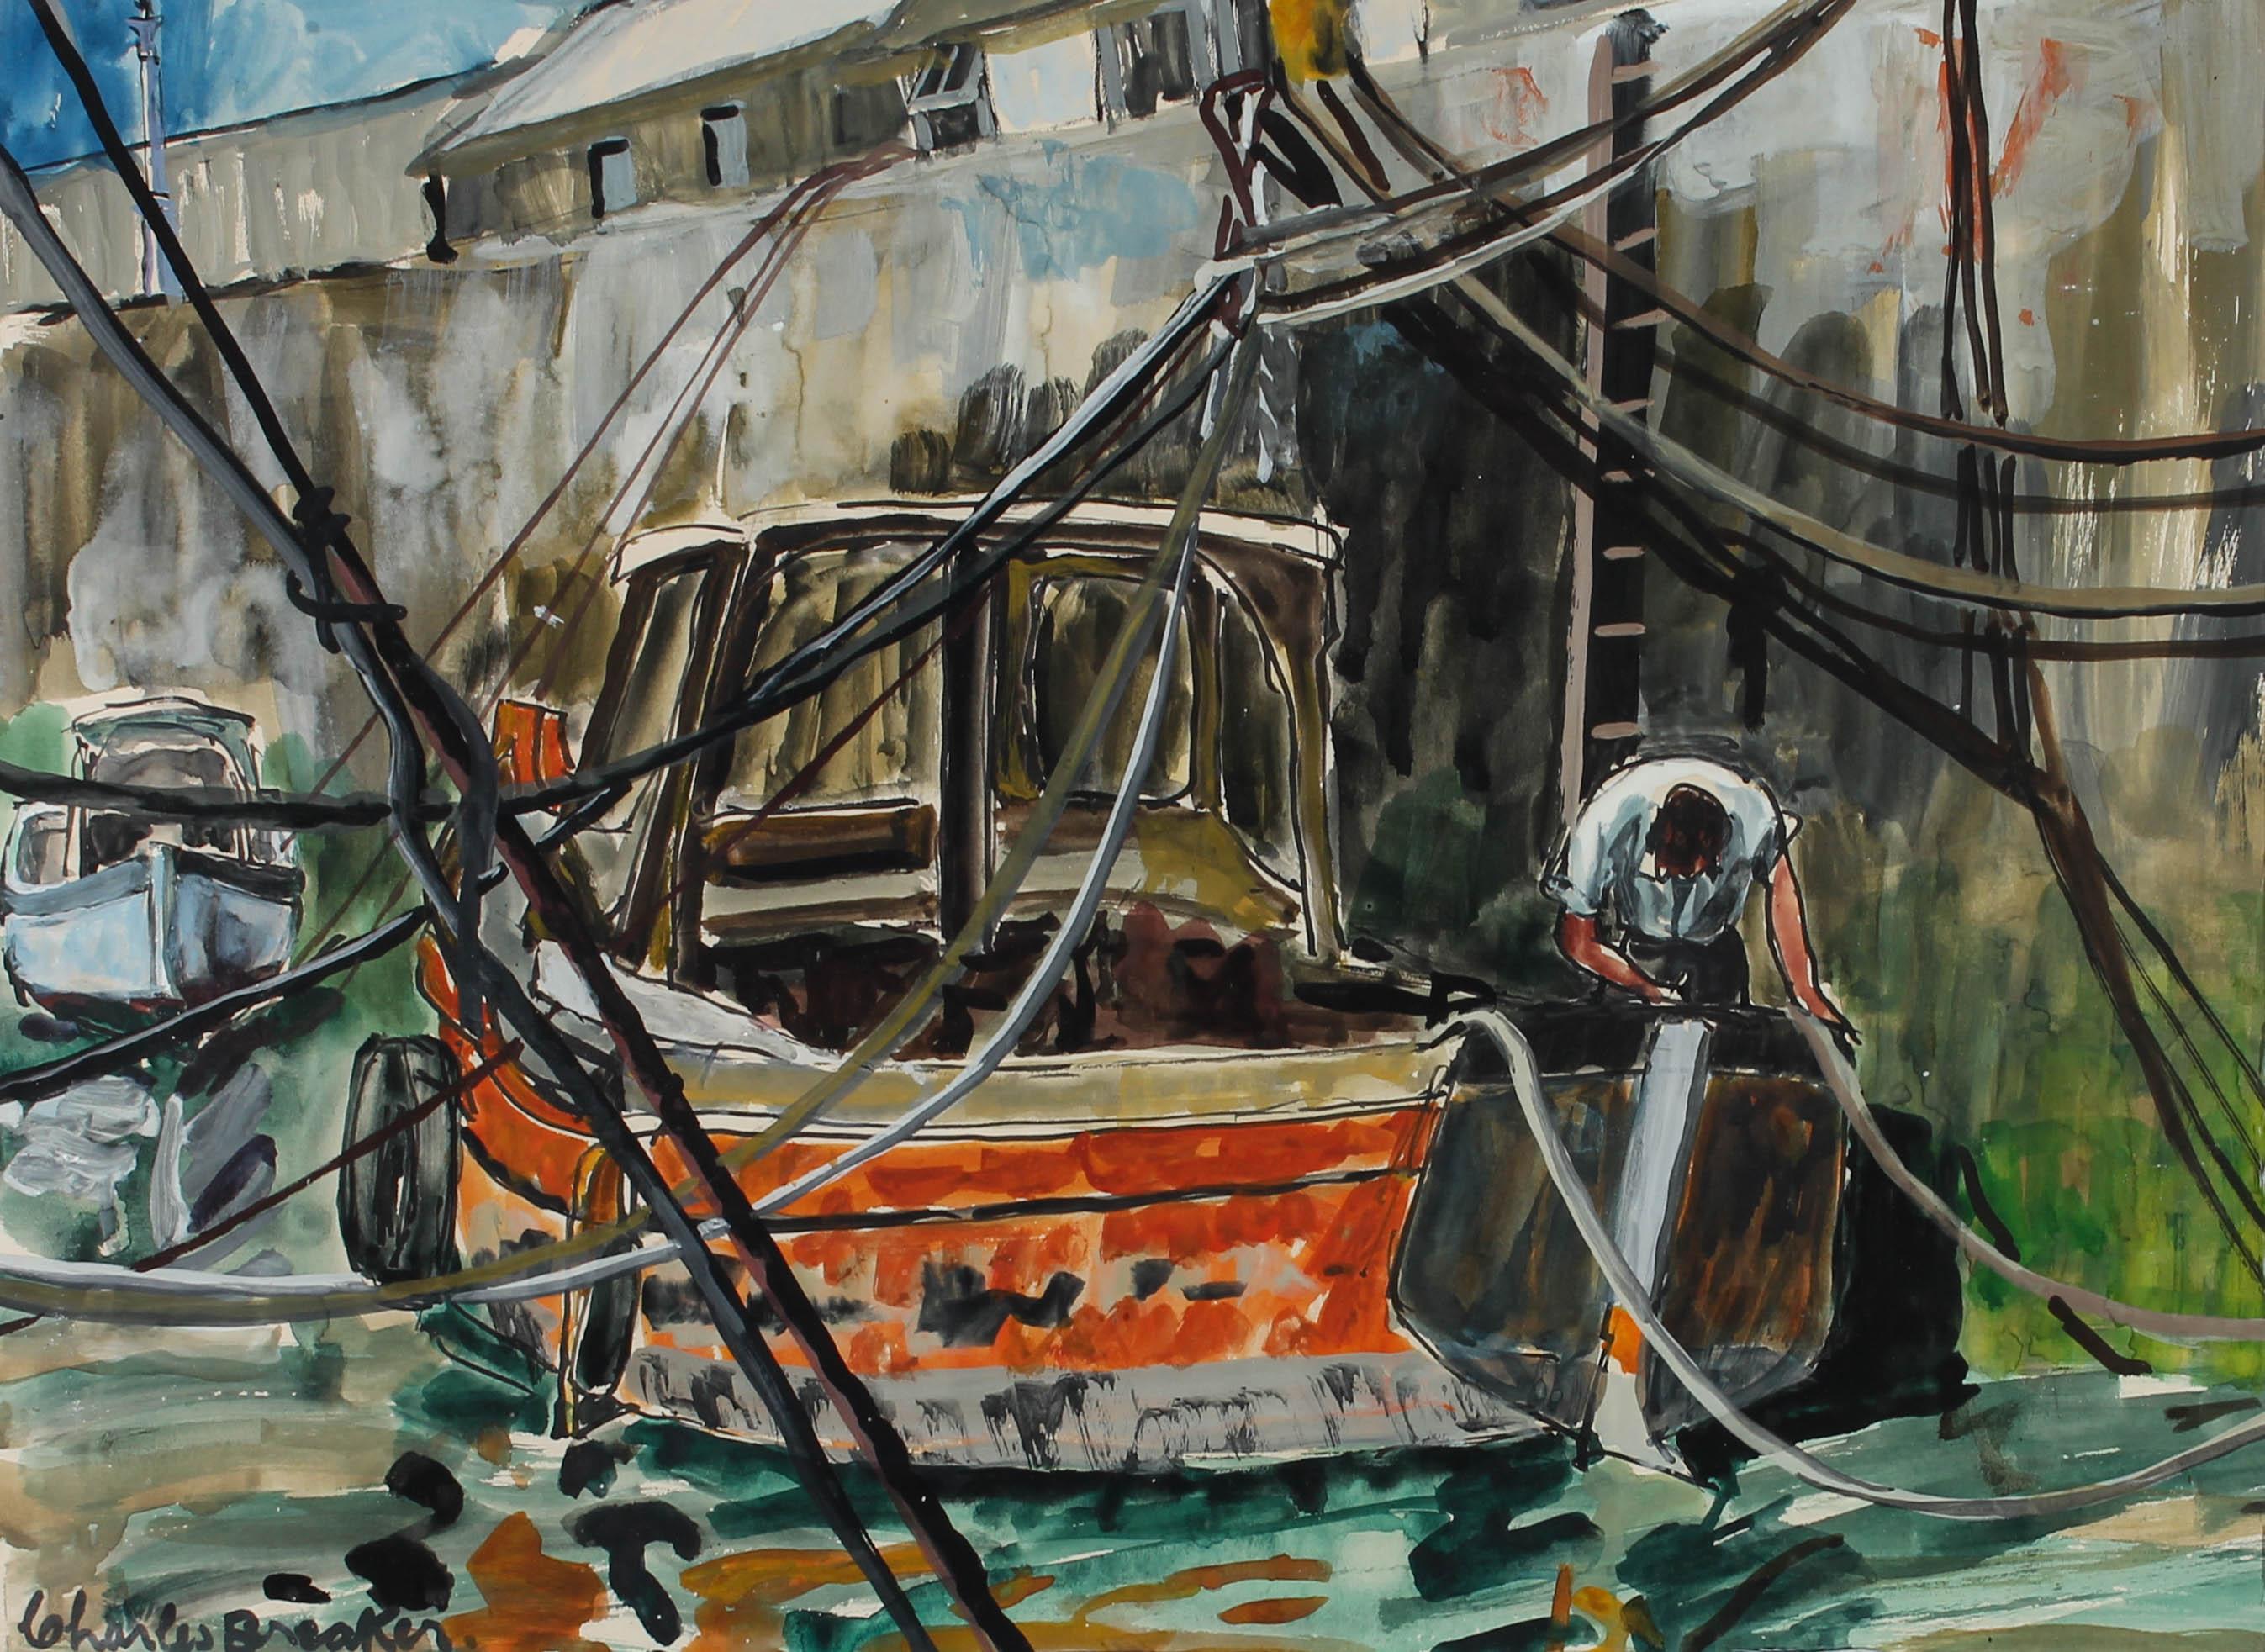 A colourful and energetic acrylic painting of a bright orange fisherman's boat, captured from the water. The owner can be seen on board, giving the boat a good once over before taking it out to sea. The orange boat commands your attention in the